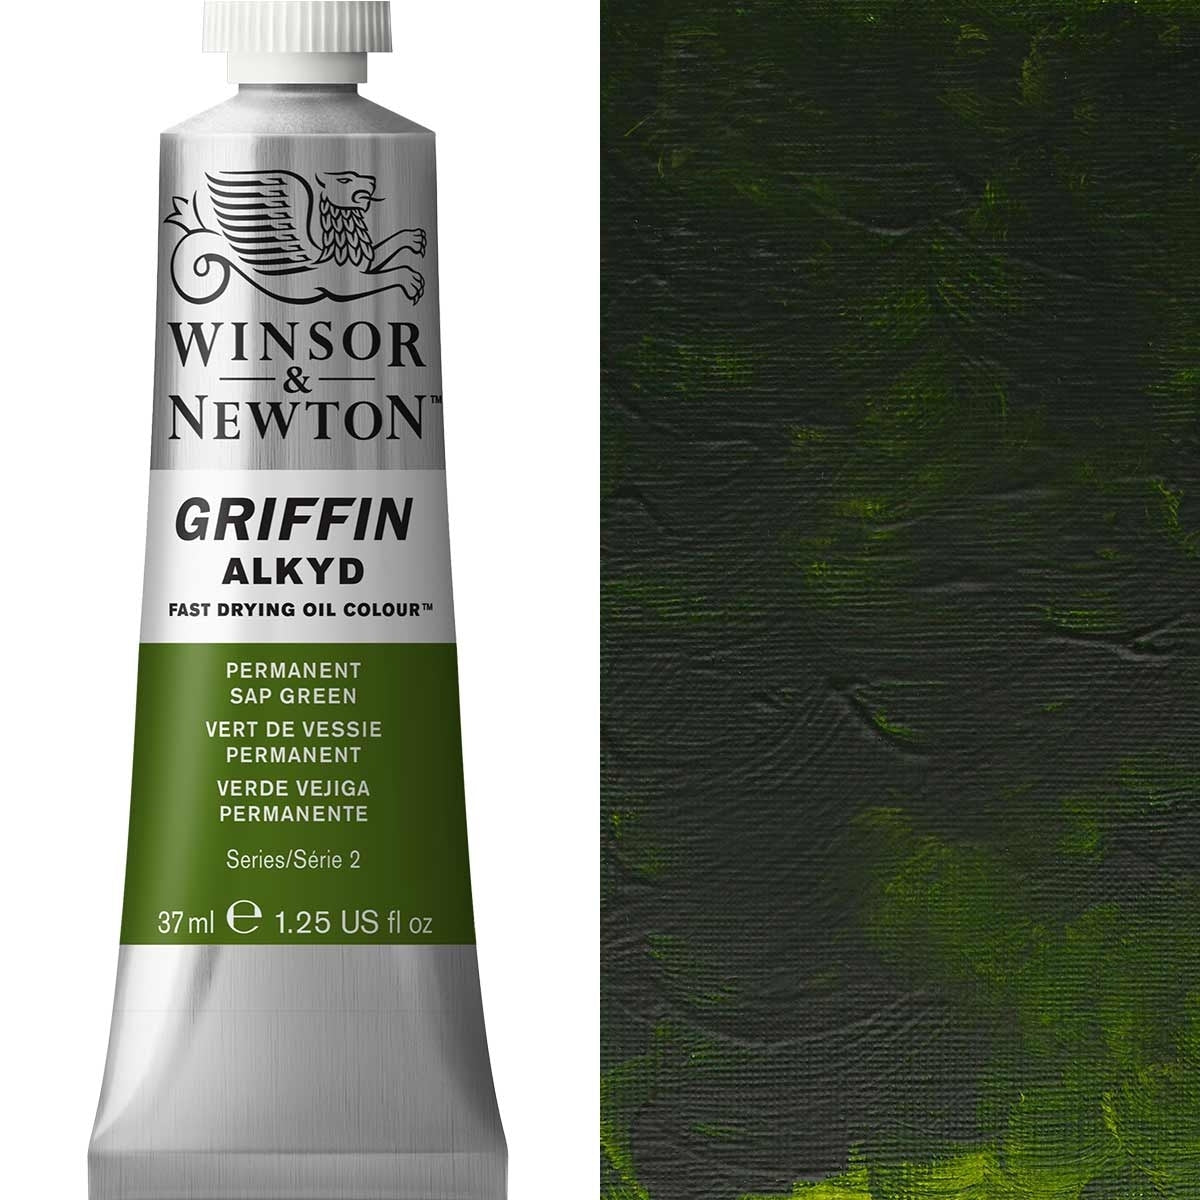 Winsor and Newton - Griffin ALKYD Oil Colour - 37ml - Permanent Sap Green